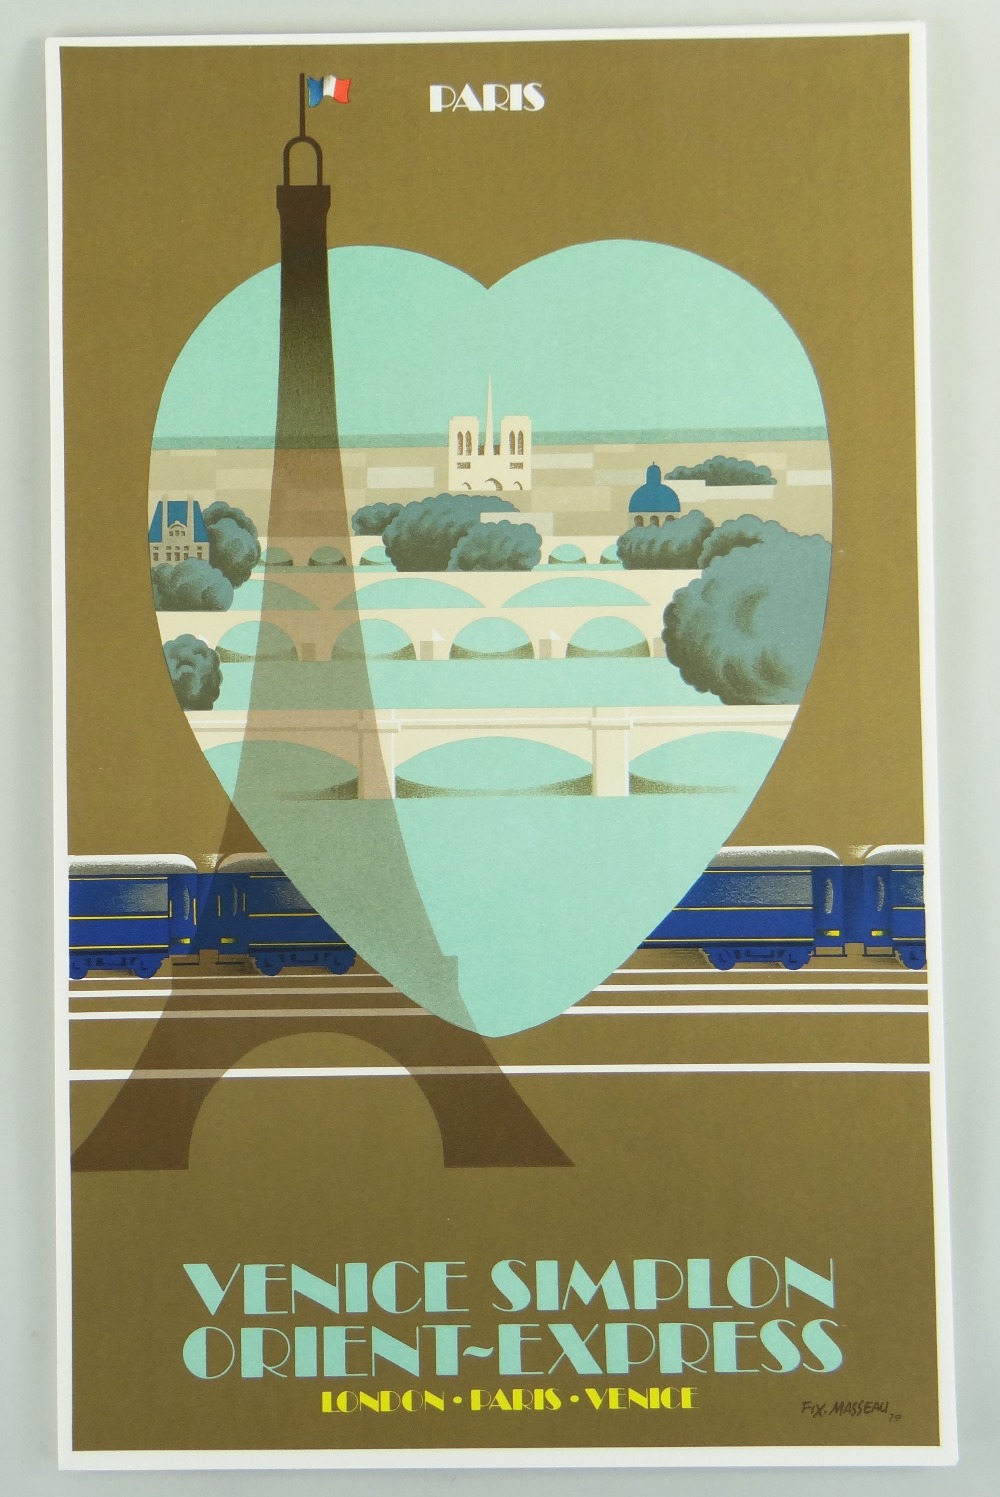 PIERRE FIX-MASSEAU boxed set of twelve limited edition (70/200) coloured lithographs - Venice - Image 4 of 20